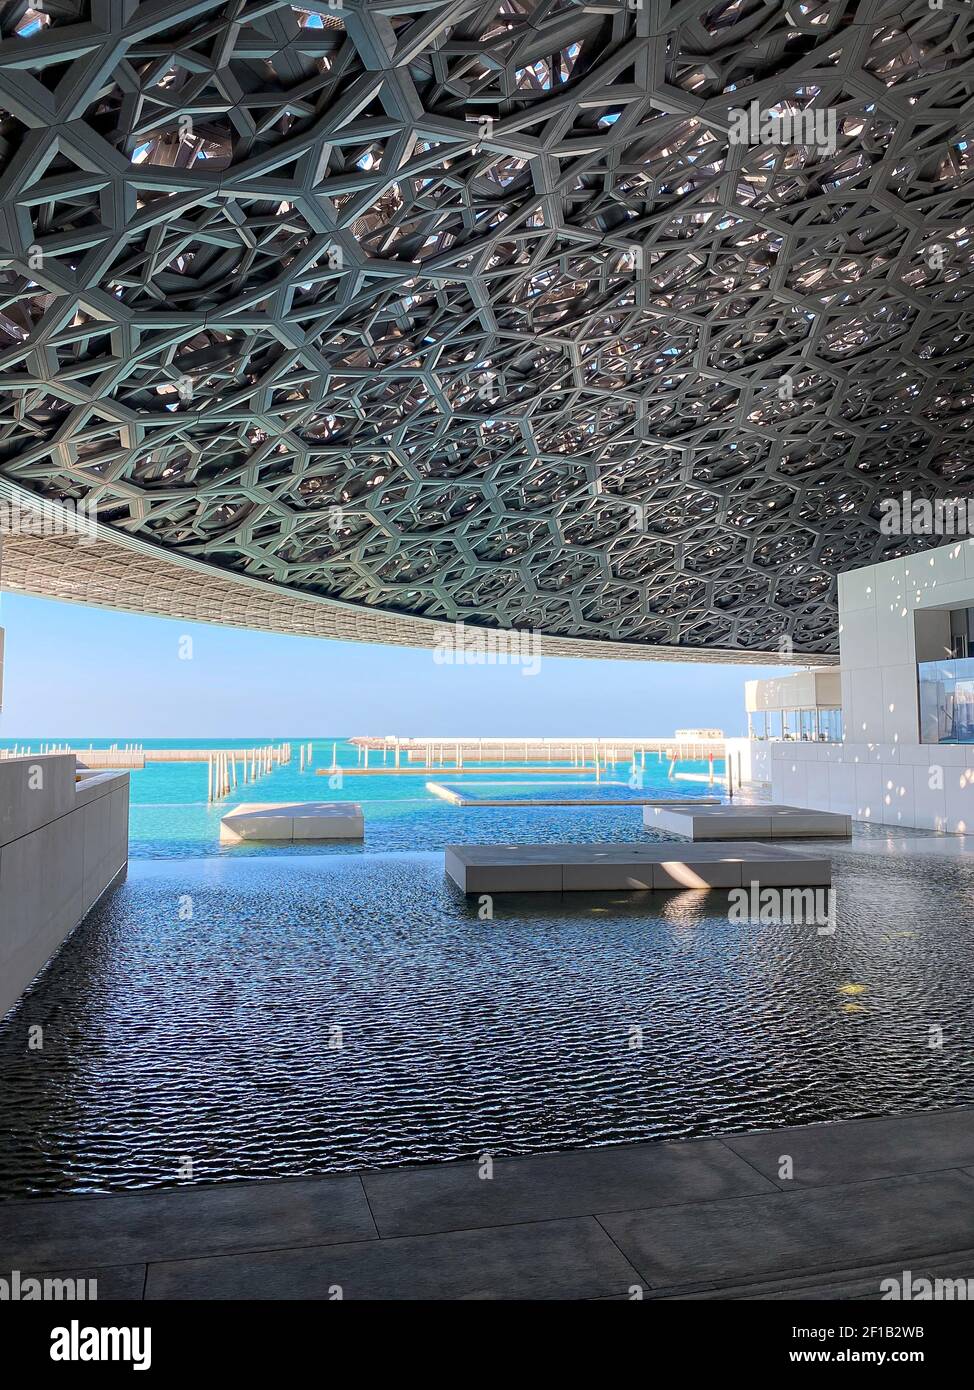 Abu Dhabi, United Arab Emirates - January 12, 2021: Louvre museum in Abu Dhabi interior and dome with with characteristic architecture and seaside vie Stock Photo